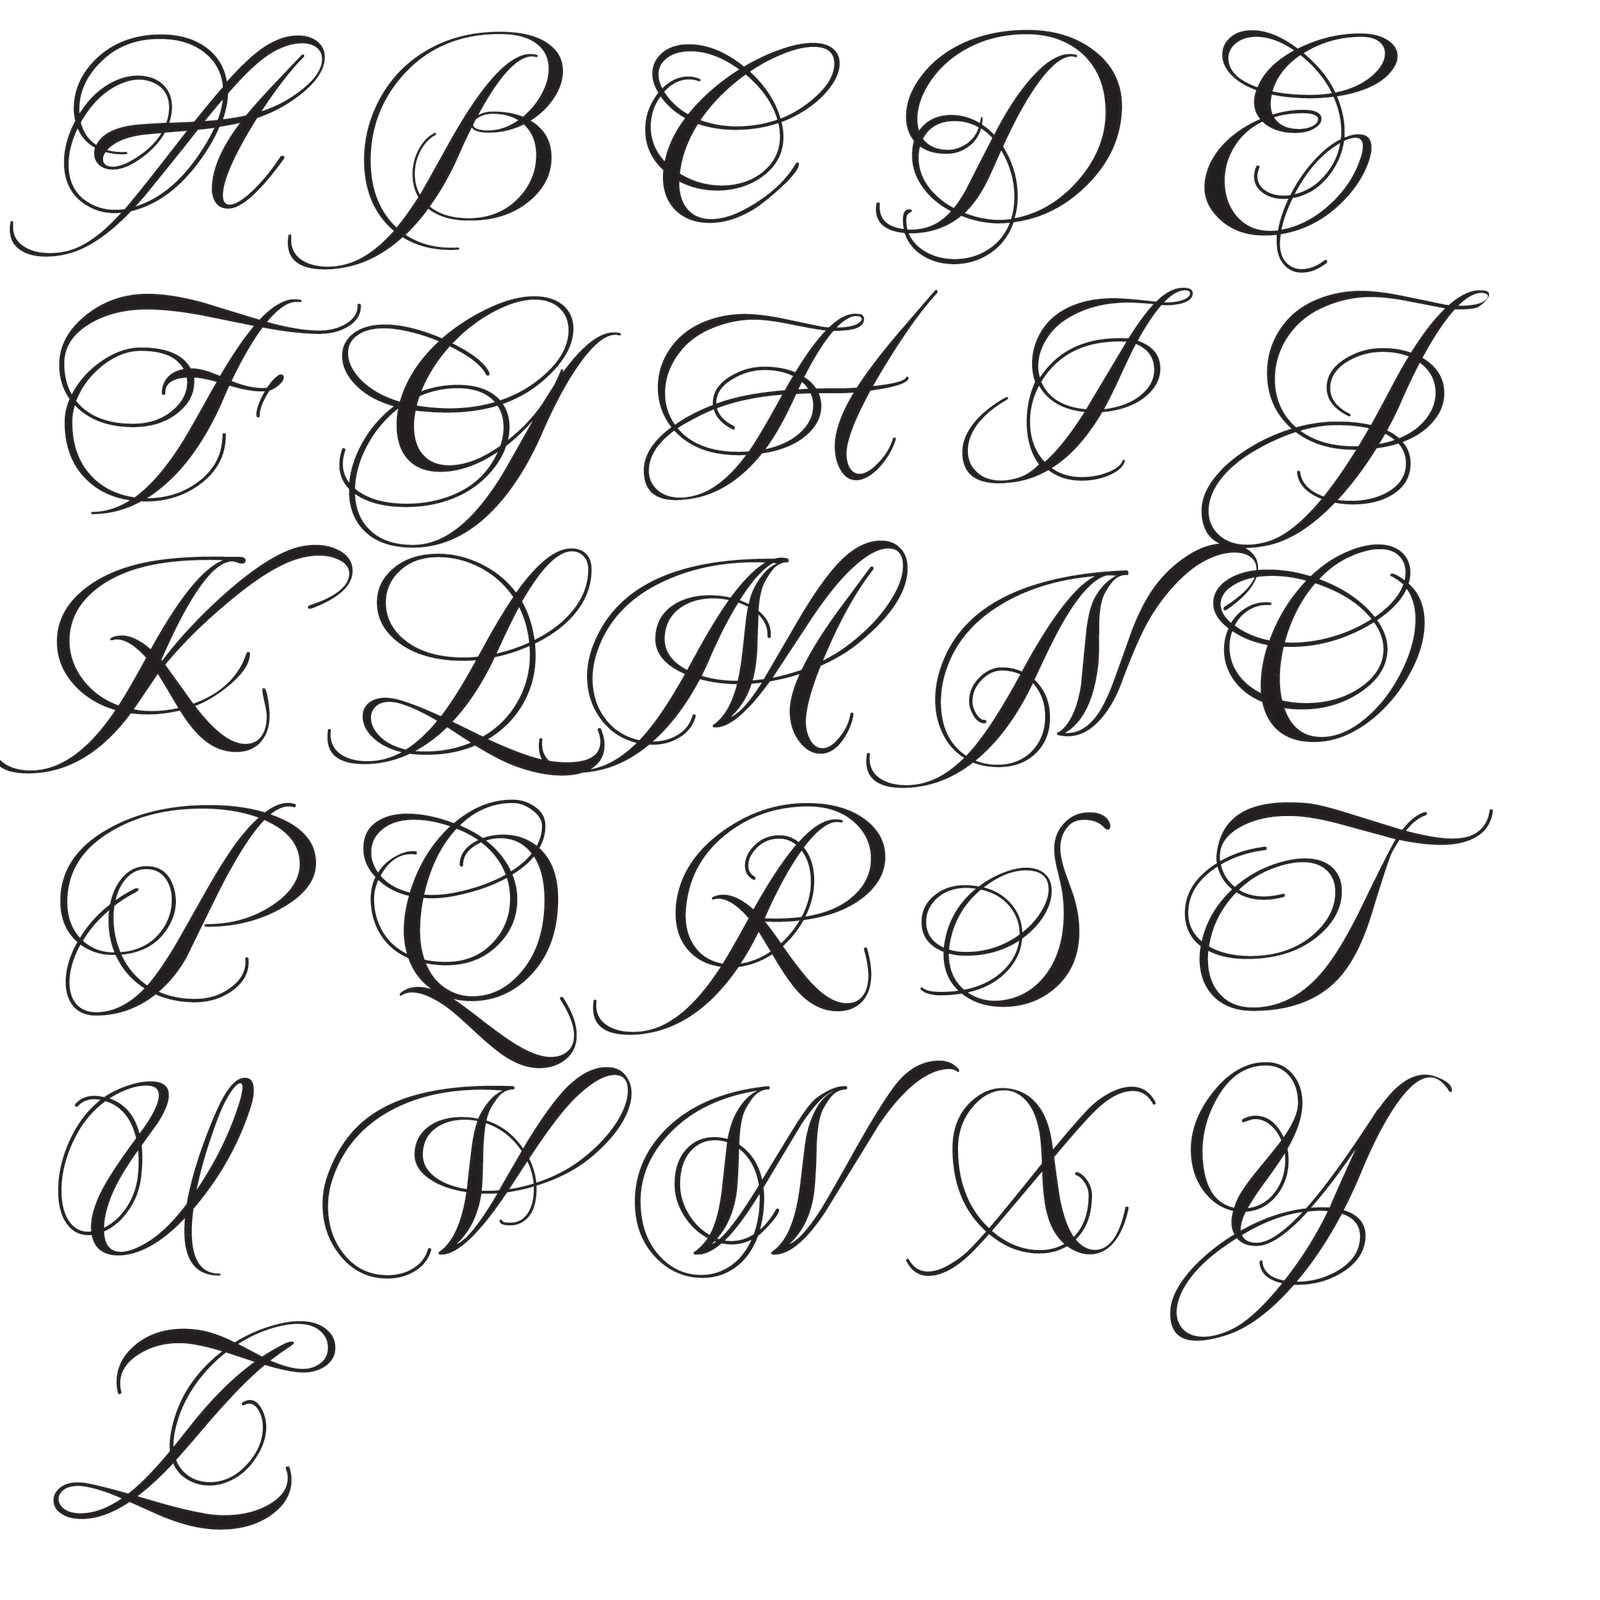 Scalloped Circle Fonts Http   Www Pic2fly Com Scalloped Circle Fonts    